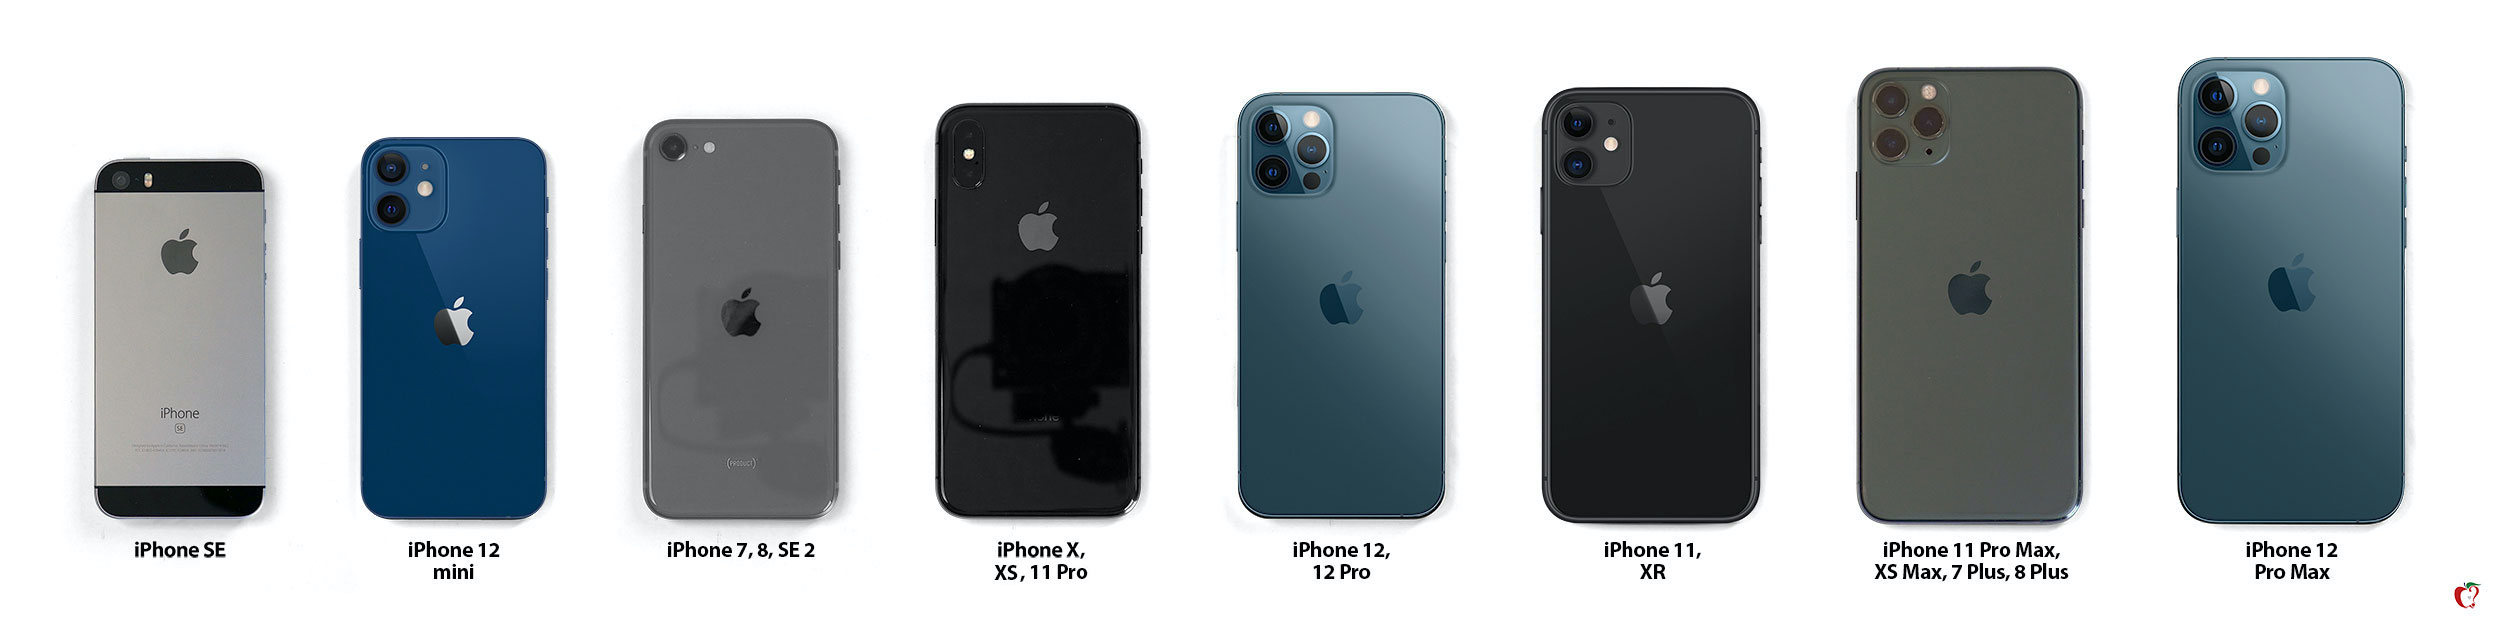 Iphone 12 Mini And Max Size Comparison All Iphone Models Side By Side Macrumors